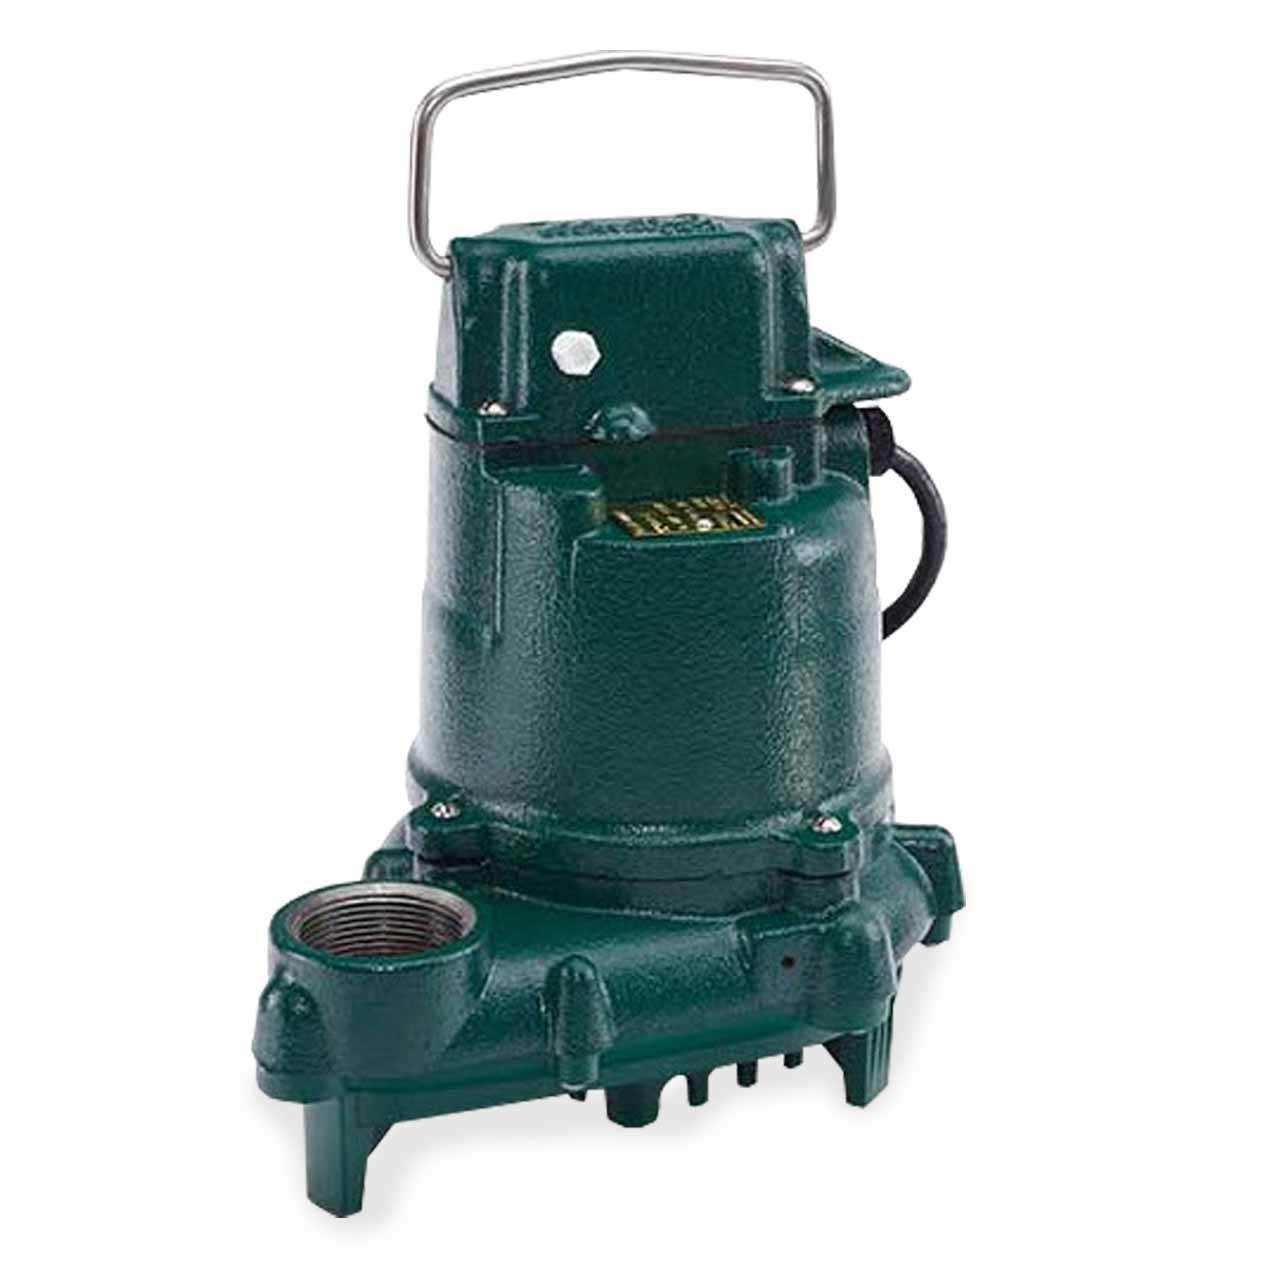 Zoeller Model N53 Mighty-Mate Non-Automatic Cast Iron Effluent Pump 115 V 0.3 HP 